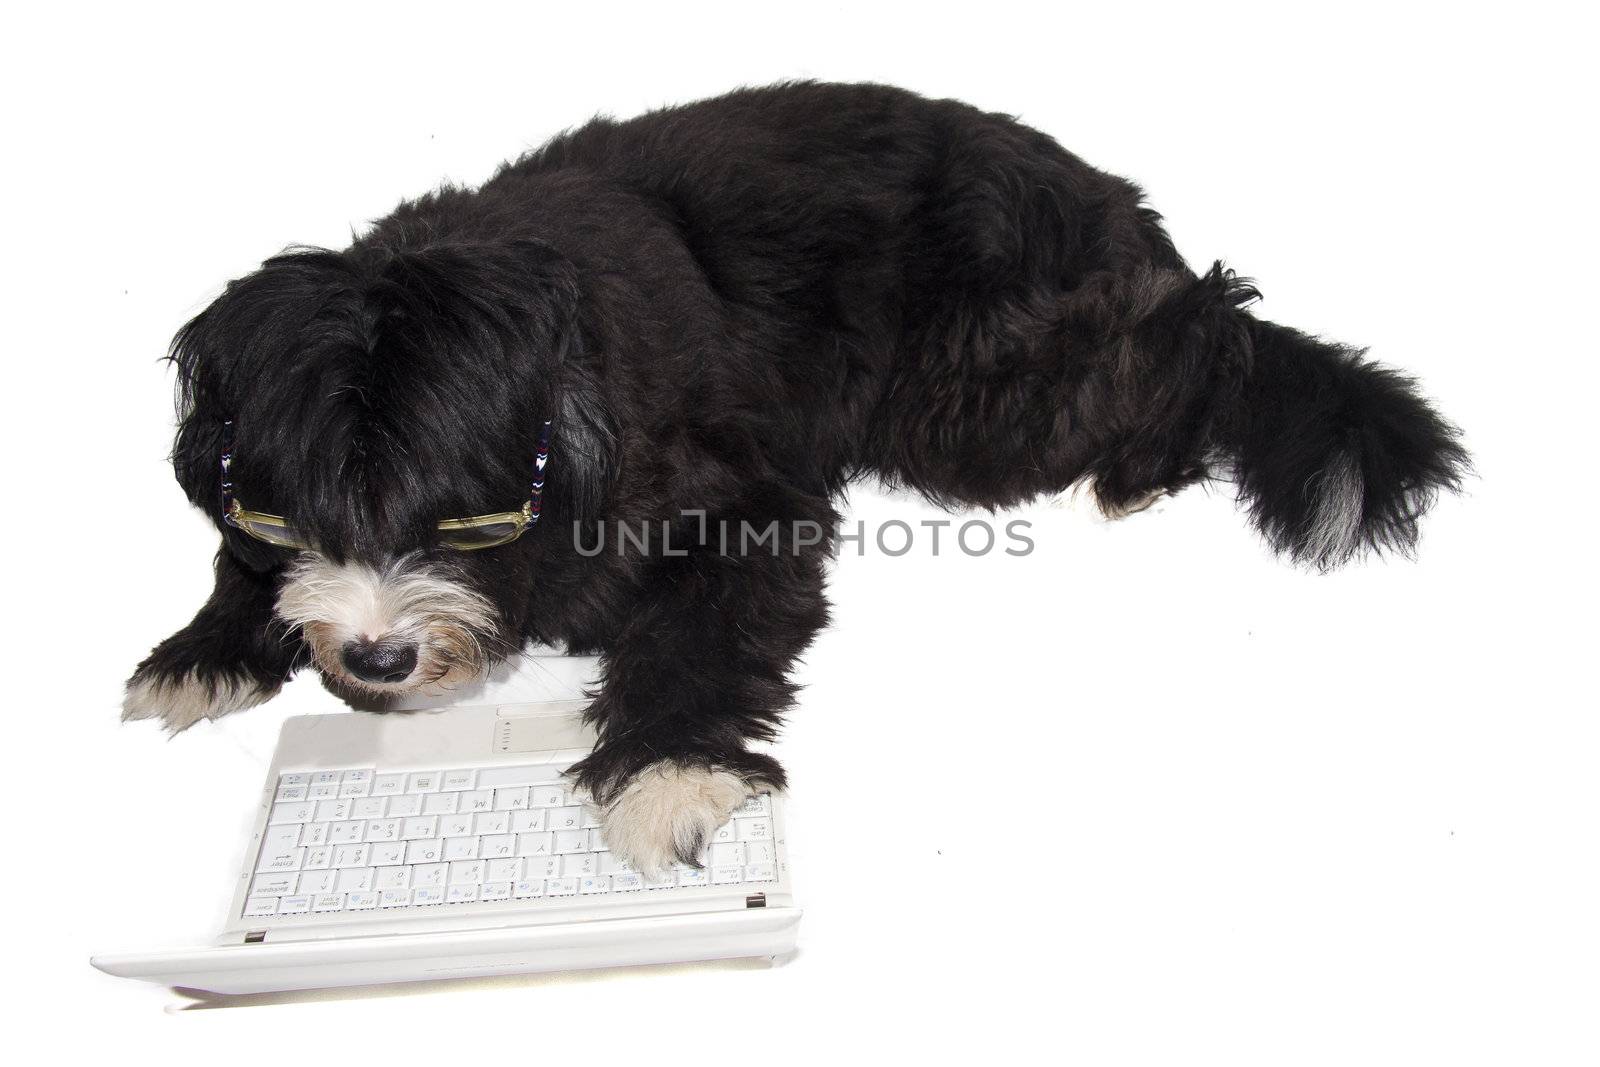 a dog that goes on the internet